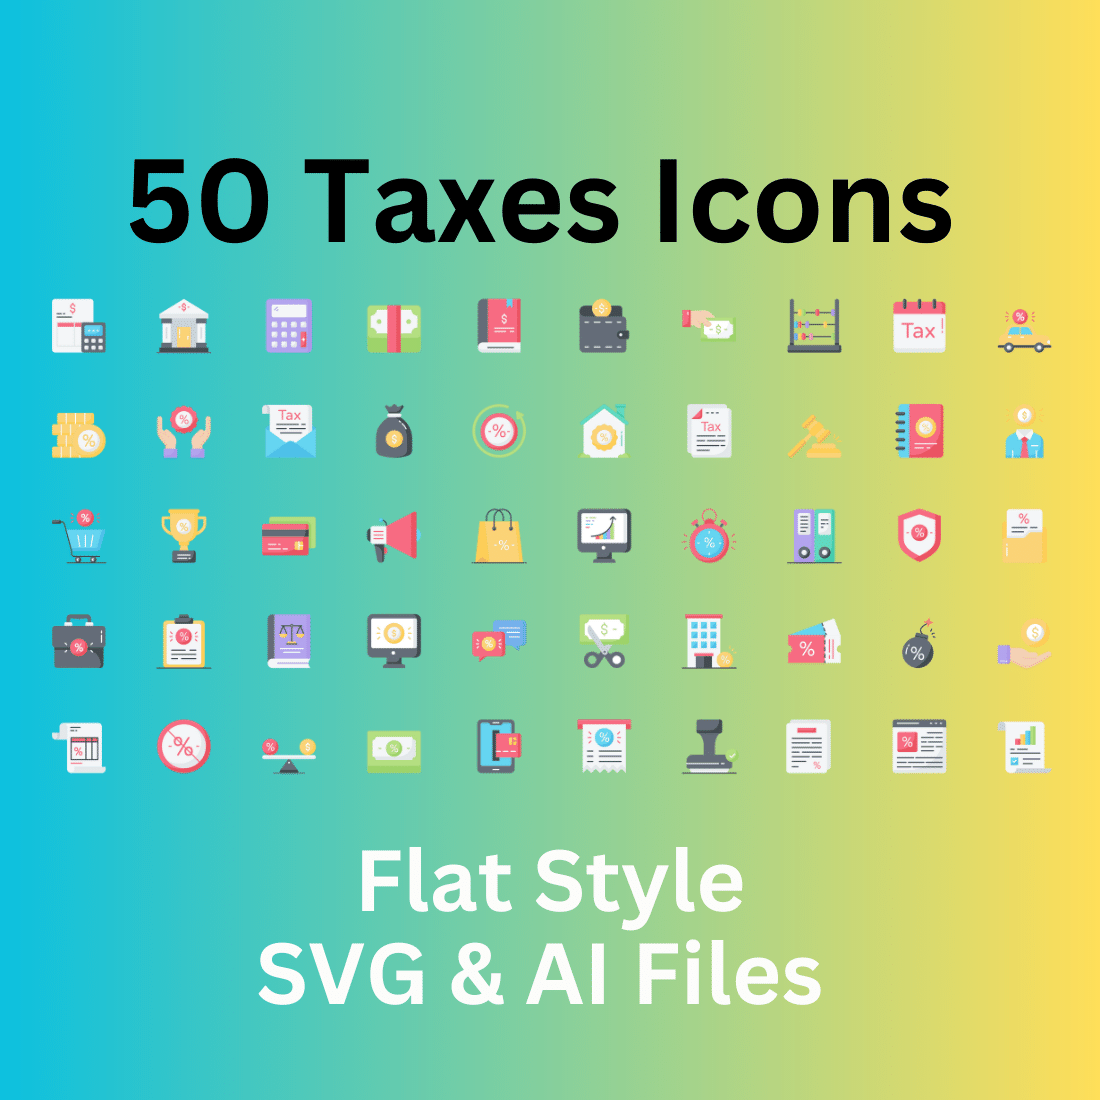 Taxes Icon Set 50 Flat Finance Icons - SVG And AI Files cover image.